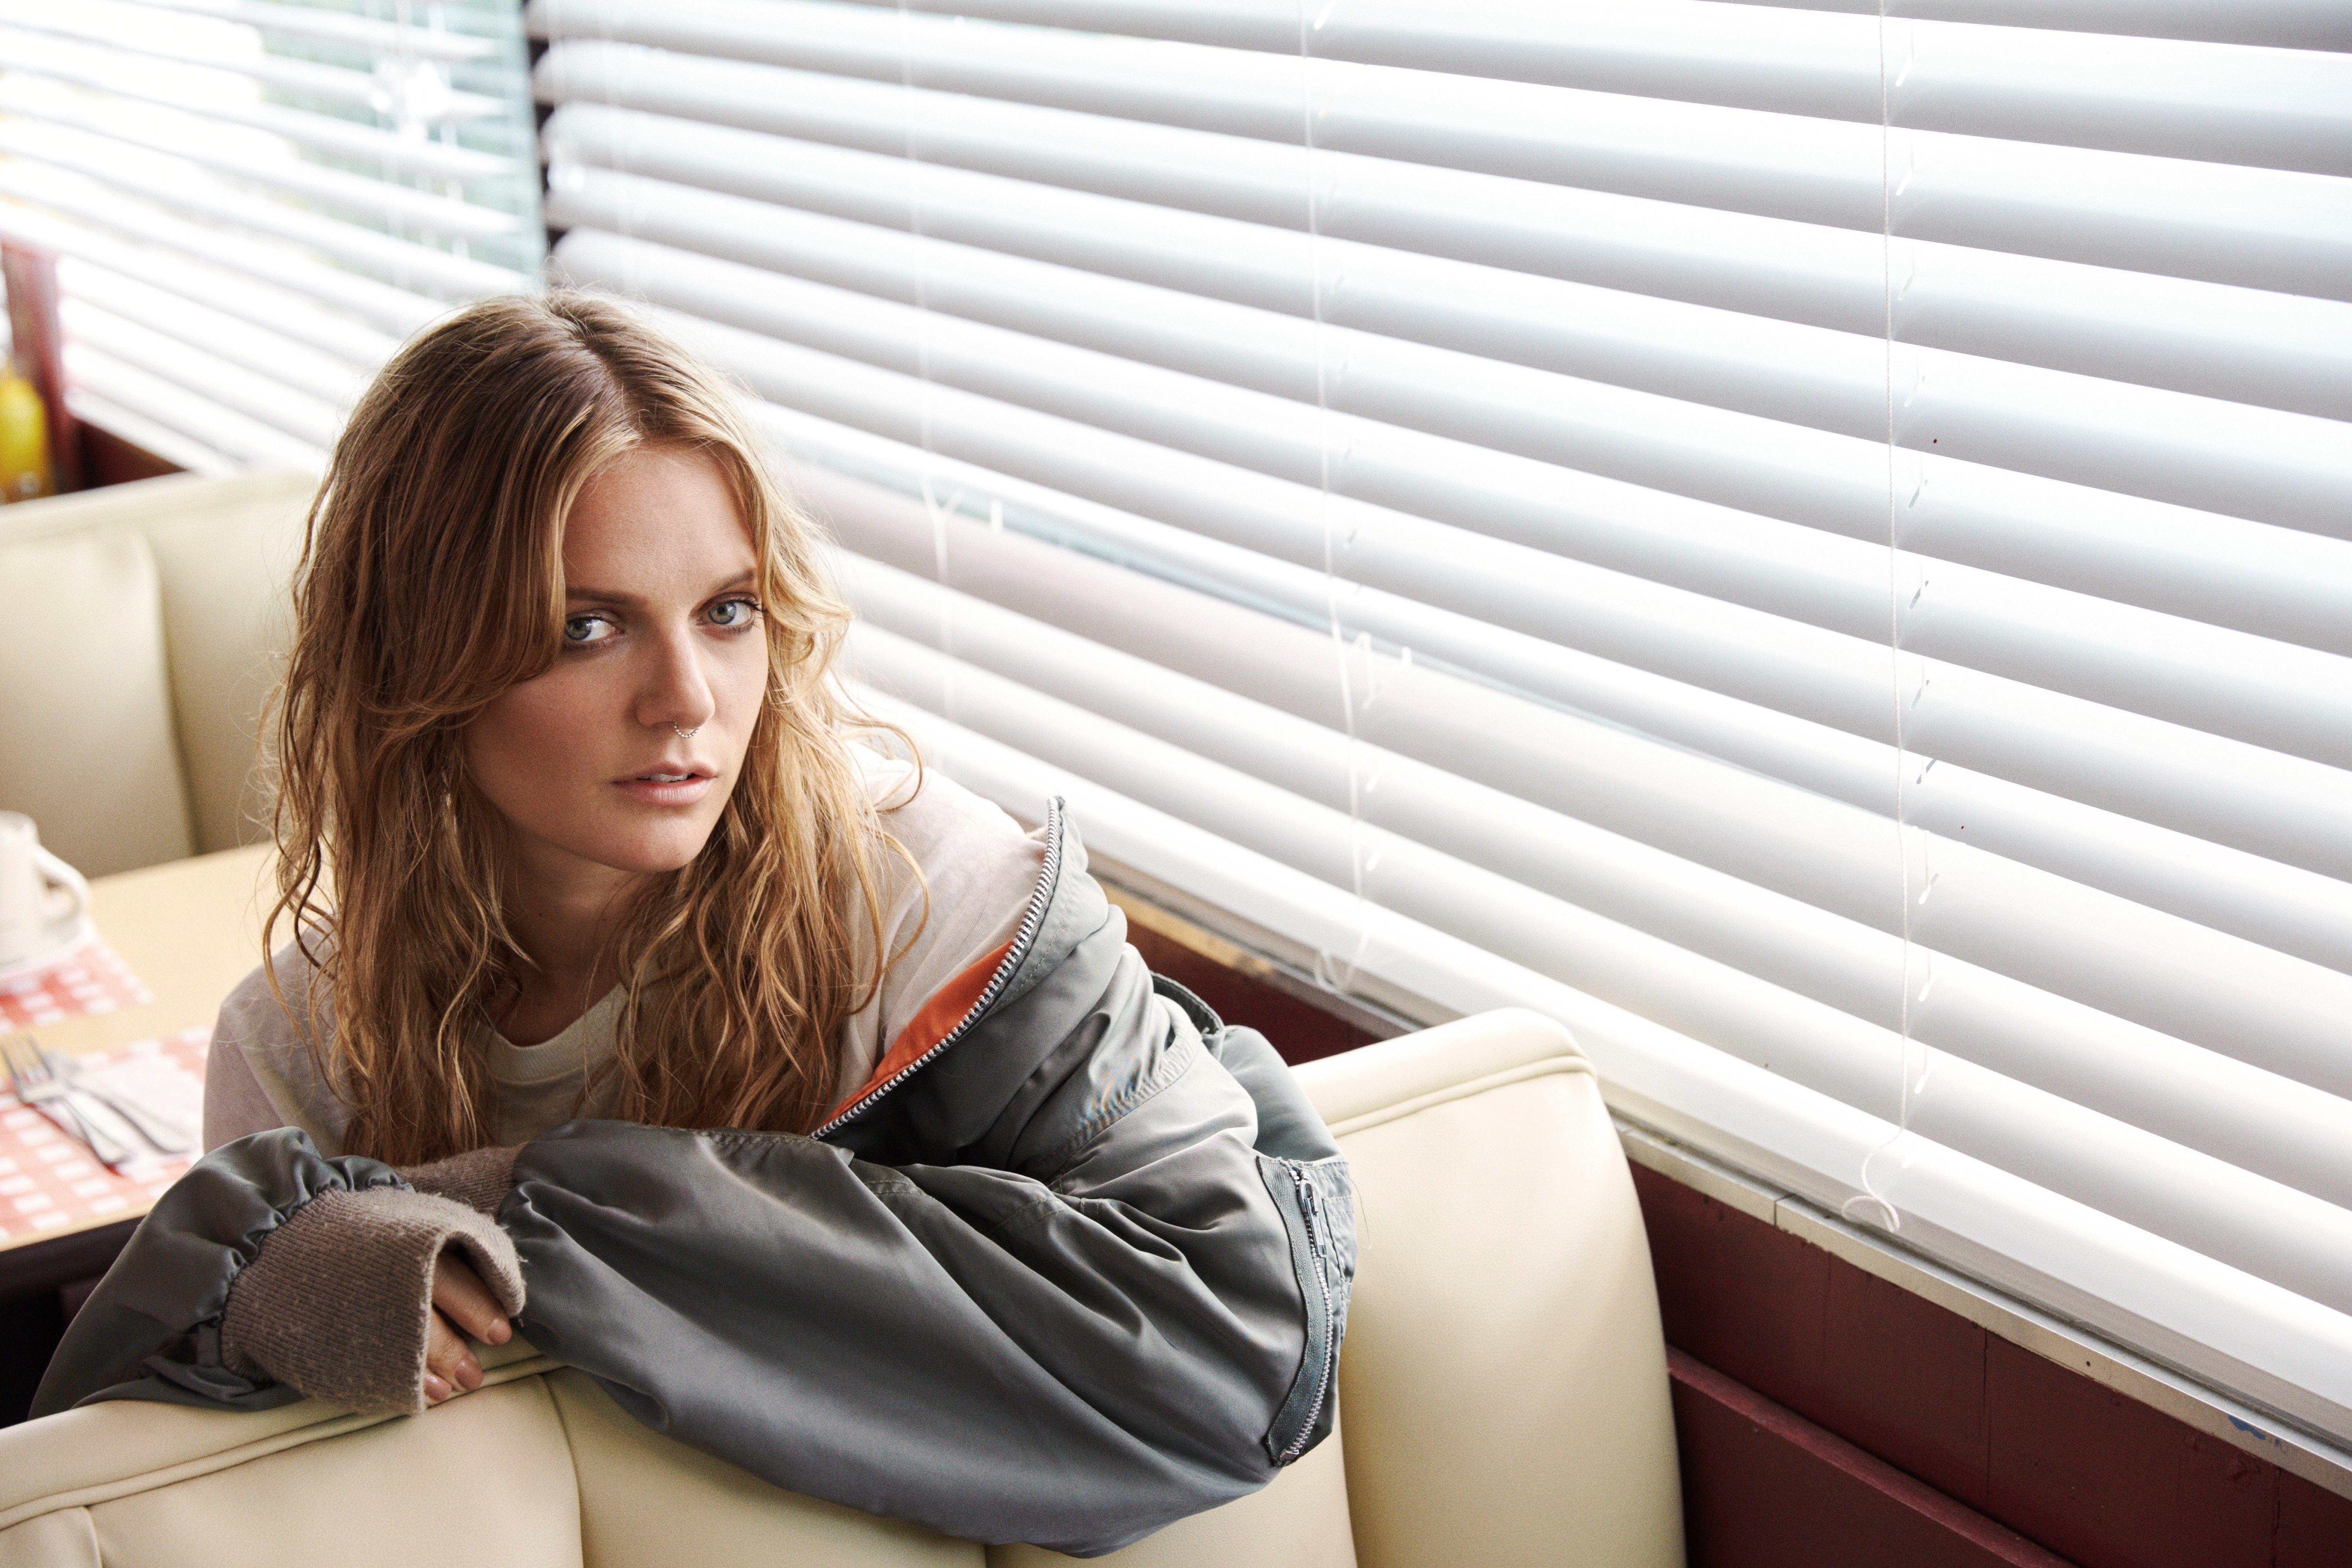 wallpaper image tove lo Download Awesome collection